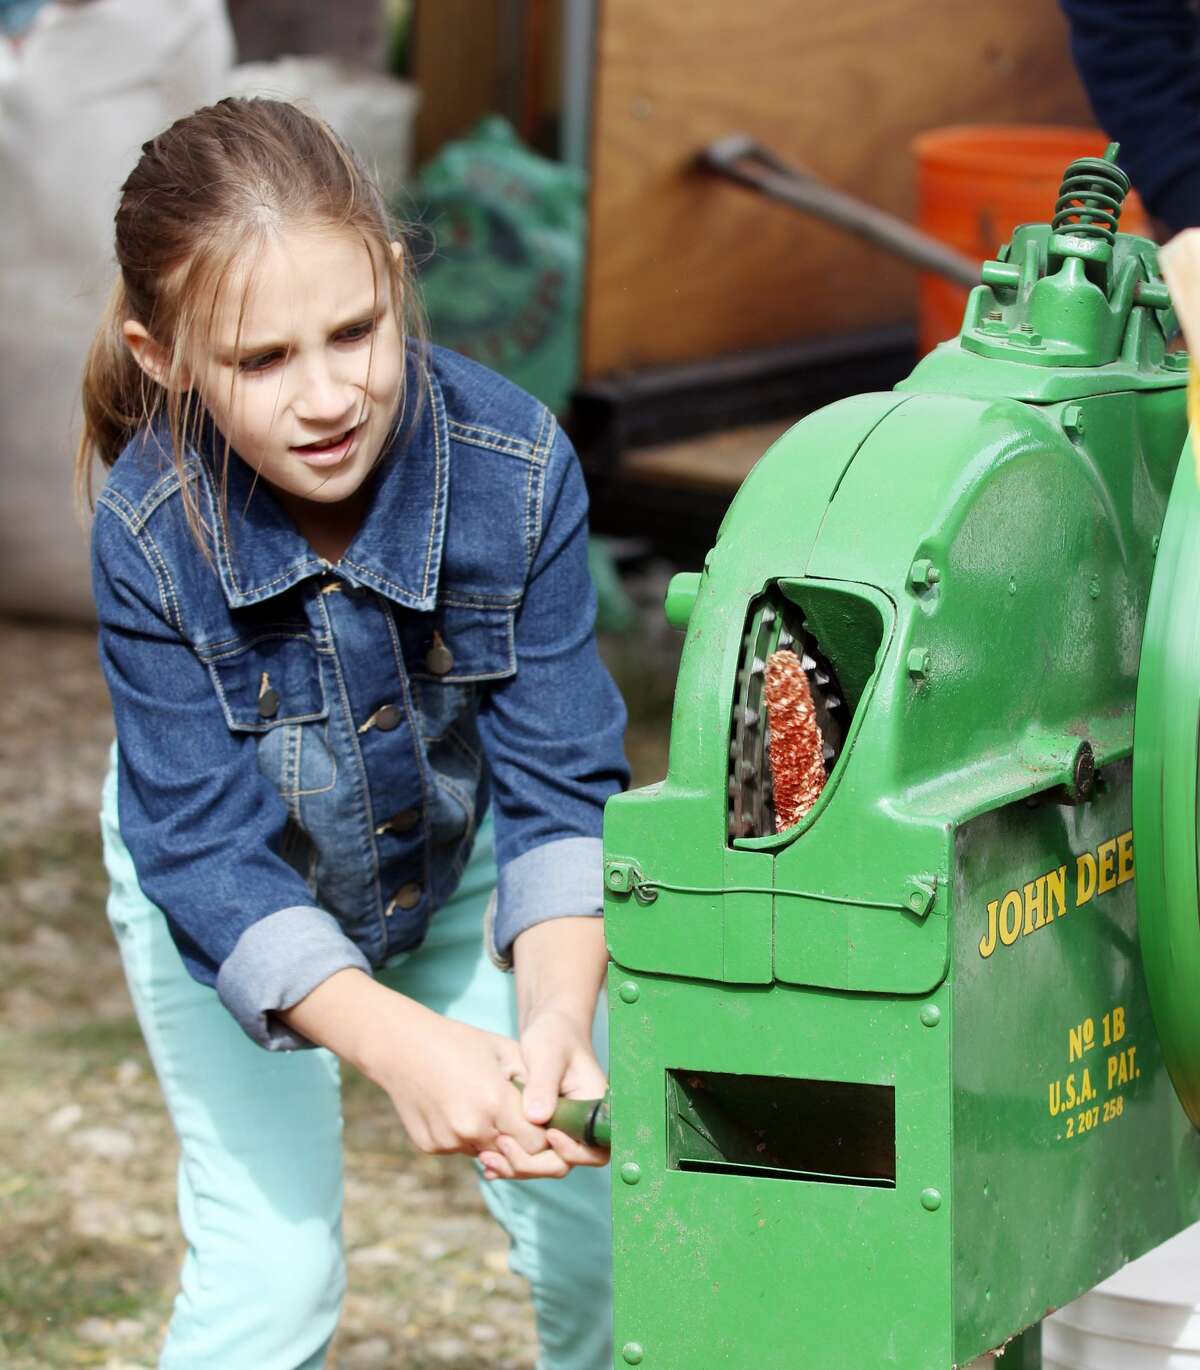 Fall Family Days featured a variety of old fashioned exhibits at the Octagon Barn including gas engines, a sawmill, field work, threshing, a blacksmith shop, an apple cider mill, a sugar shack, a grain elevator and much more.